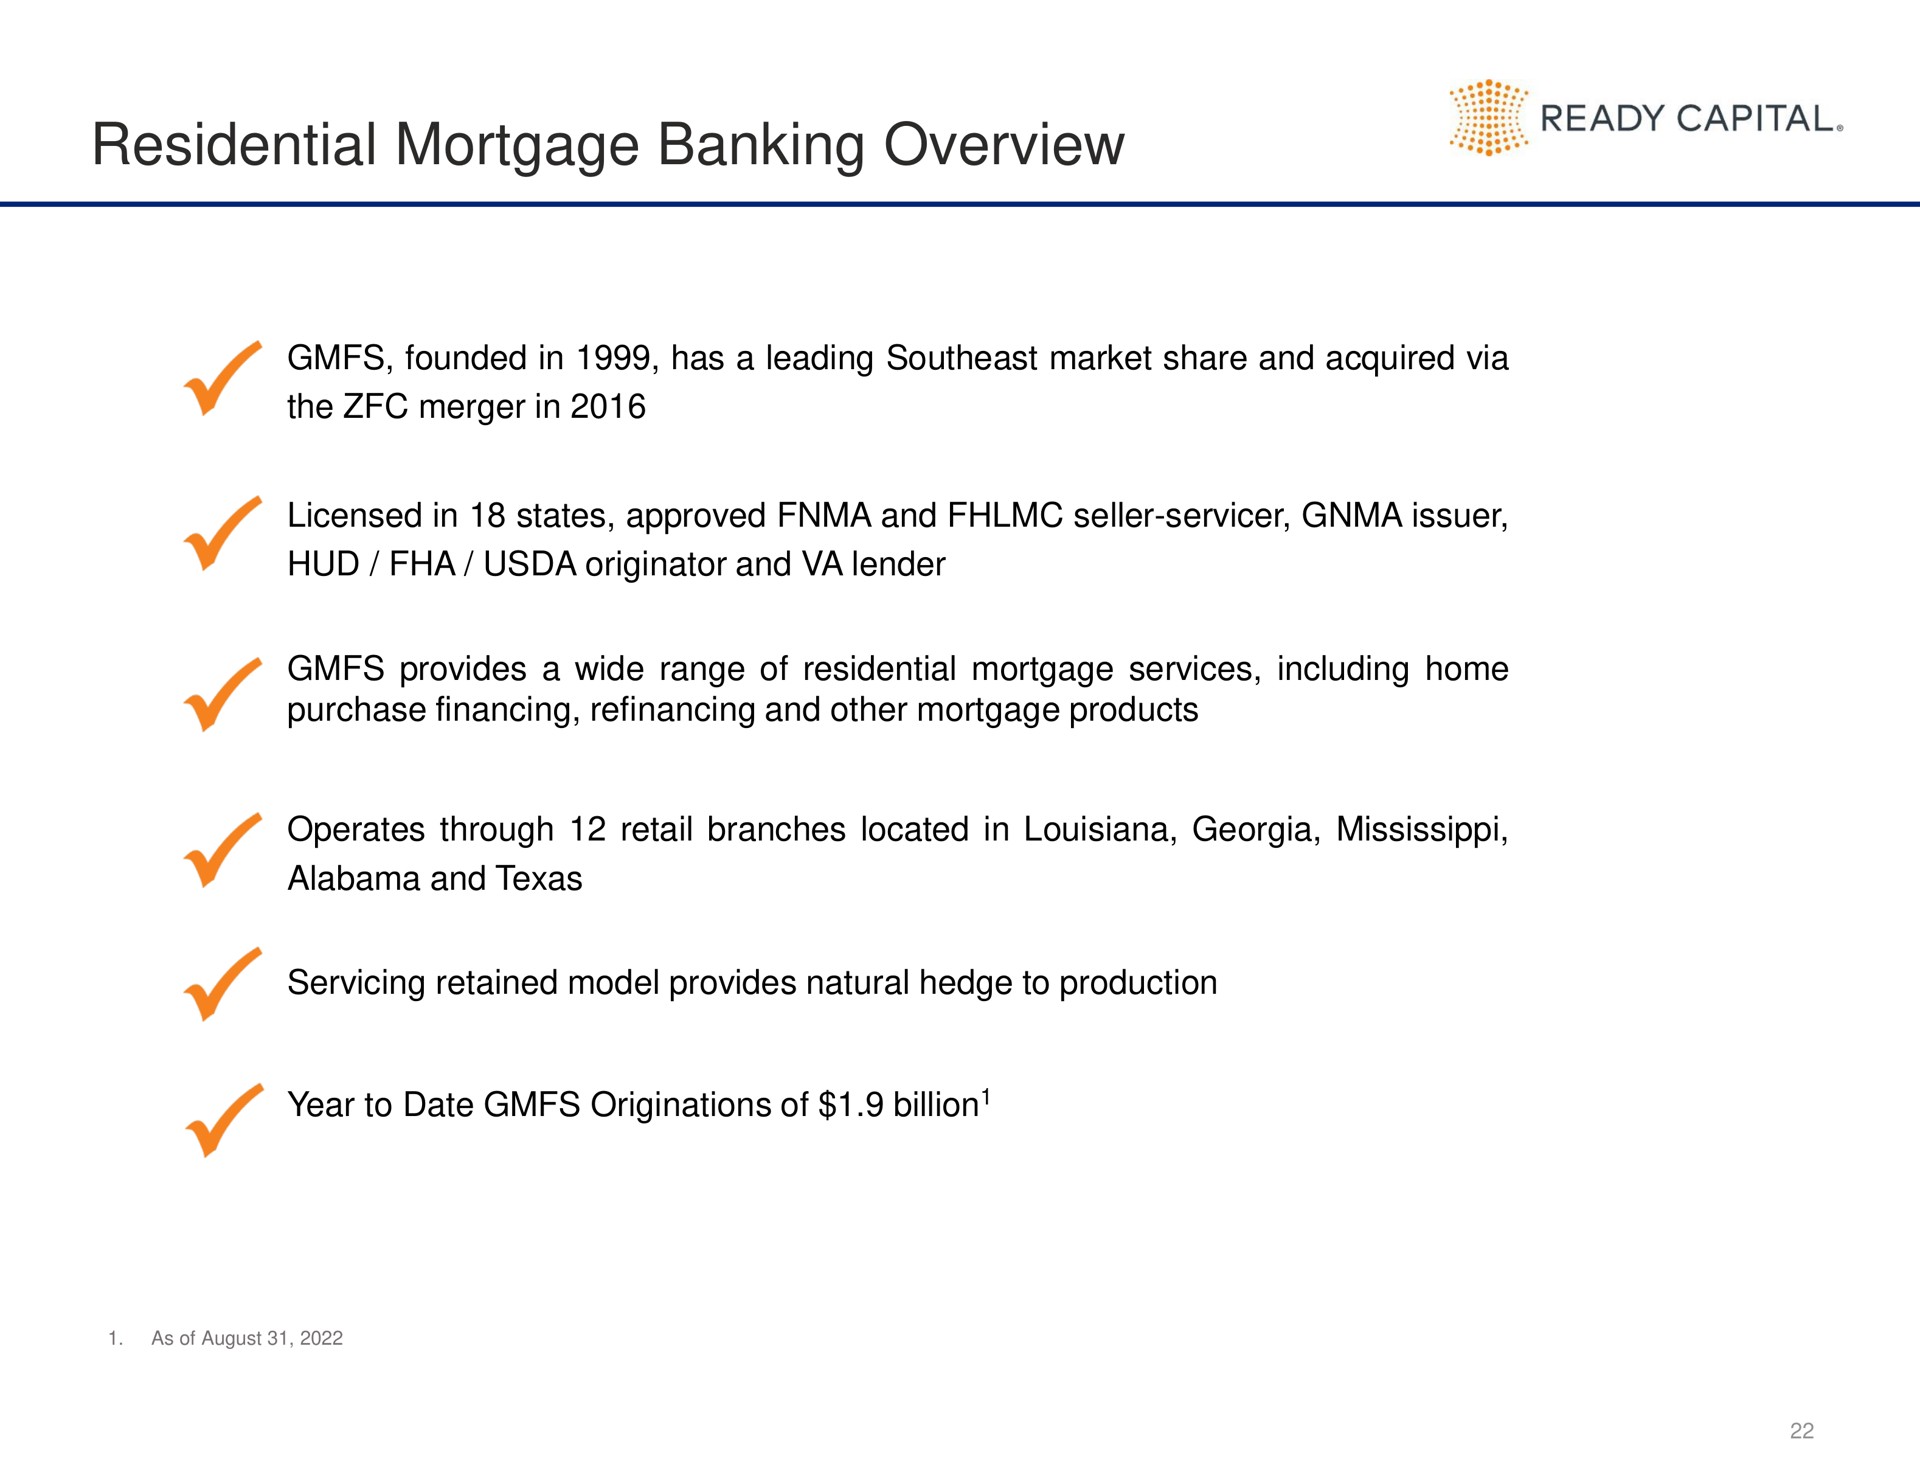 residential mortgage banking overview ready capital | Ready Capital